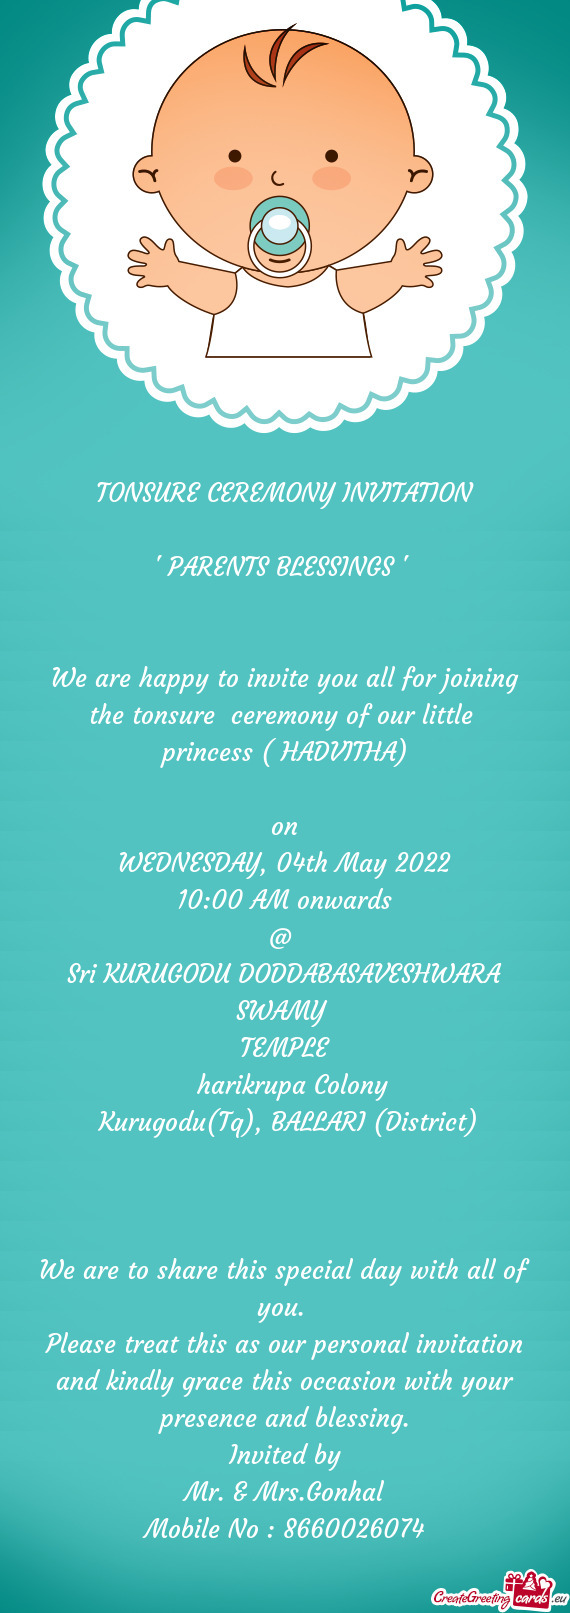 We are happy to invite you all for joining the tonsure ceremony of our little